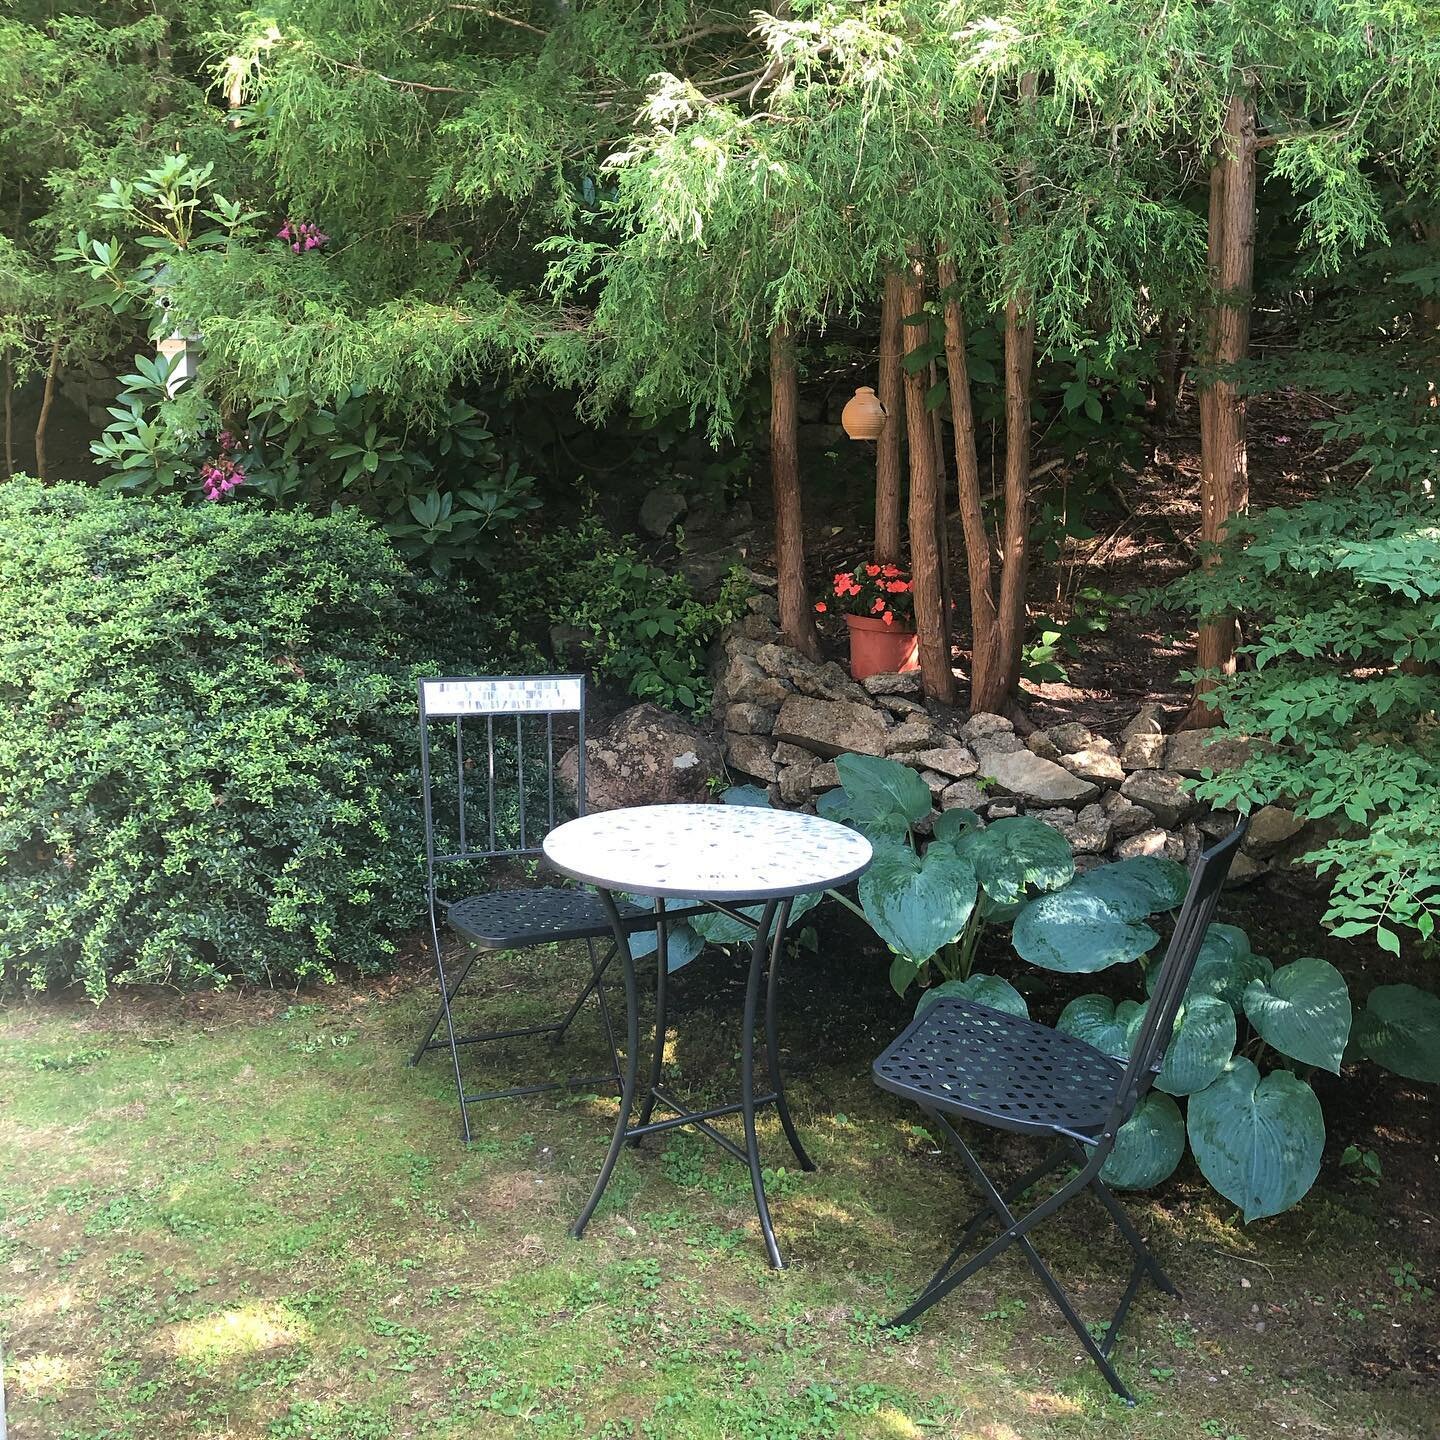 Did you know we have outdoor tables in our back garden too?

Call in your order, pick it up at our takeout window, and take a seat! 🌼🌷🌱

Outdoor seating is open Thursday - Sunday, 8am - 12pm. 

#capecodfoodies #capecodbreakfast #breakfastspot #bru